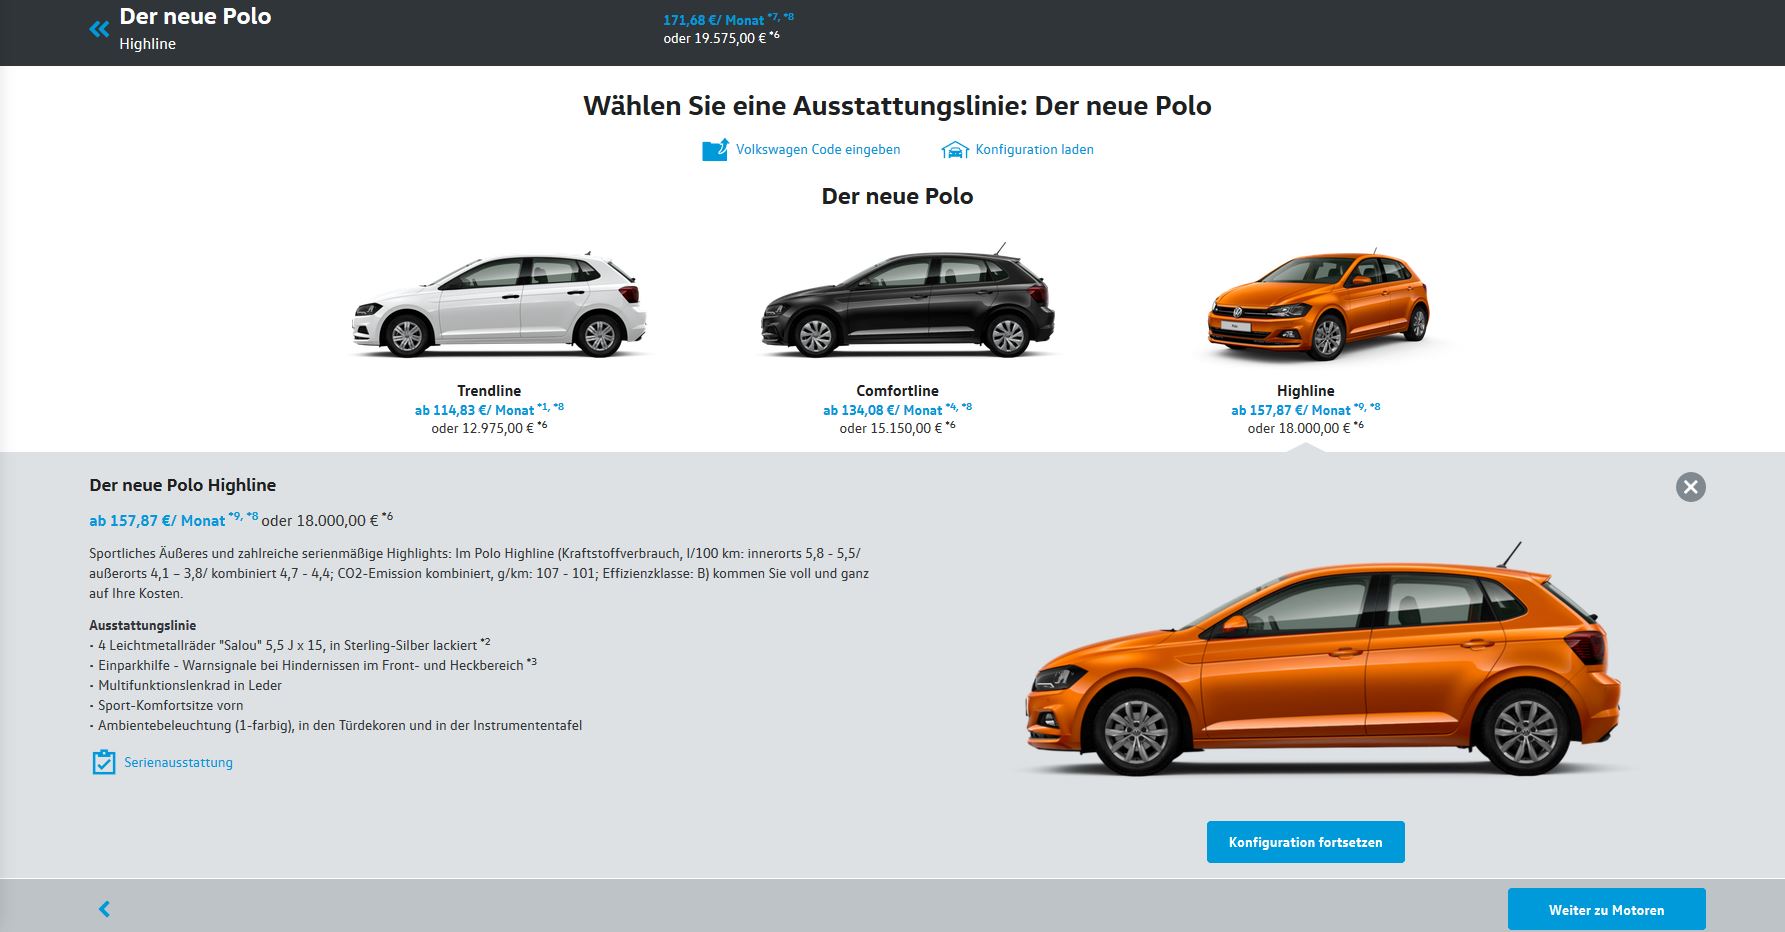 Grunde Milepæl Eve 2018 Volkswagen Polo Configurator Launched, Only Has 1-Liter Engines -  autoevolution